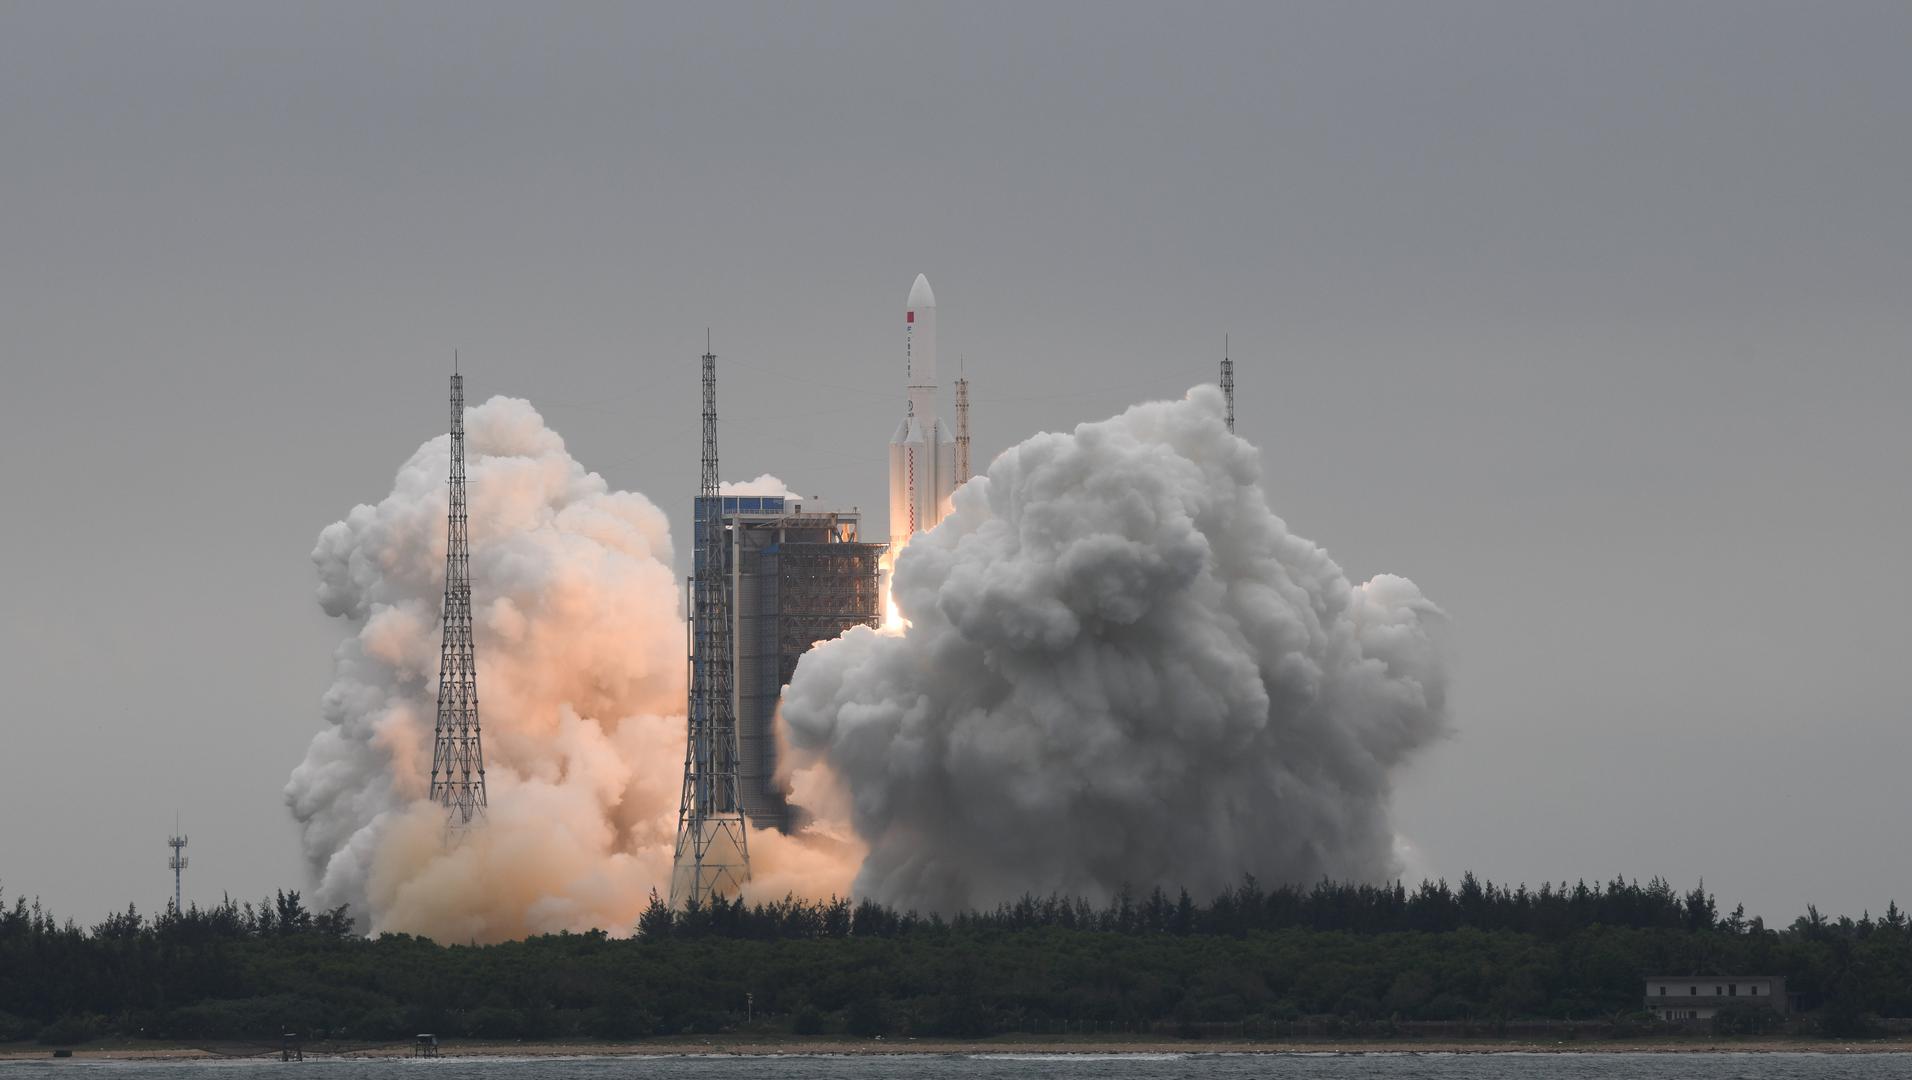 (EyesonSci)CHINA-HAINAN-WENCHANG-SPACE STATION-CORE MODULE-LAUNCH (CN) (210429) -- WENCHANG, April 29, 2021 (Xinhua) -- The Long March-5B Y2 rocket, carrying the Tianhe module, blasts off from the Wenchang Spacecraft Launch Site in south China's Hainan Province, April 29, 2021. China on Thursday sent into space the core module of its space station, kicking off a series of key launch missions that aim to complete the construction of the station by the end of next year. (Xinhua/Yang Guanyu) Yang Guanyu  Photo: XINHUA/PIXSELL